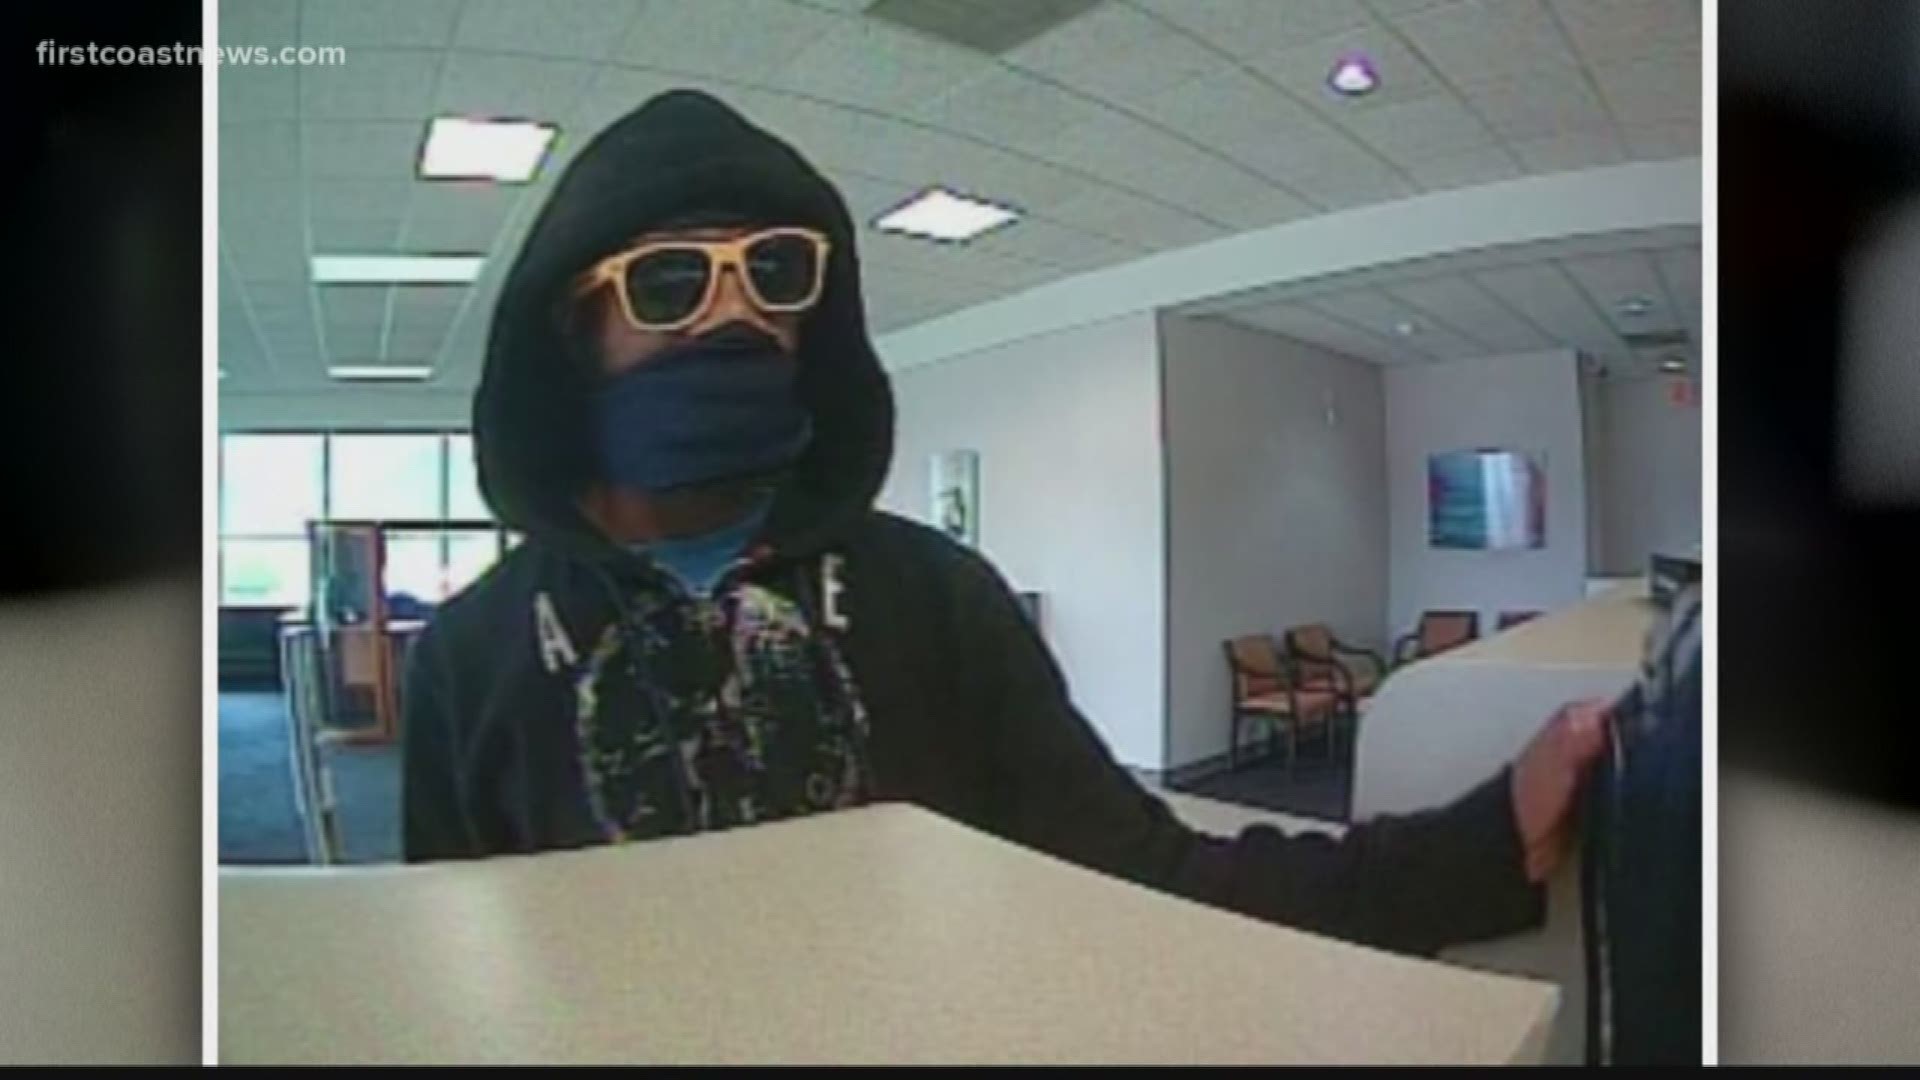 The robbery was reported at the SunTrust Bank in the 500 block of 3rd Street.